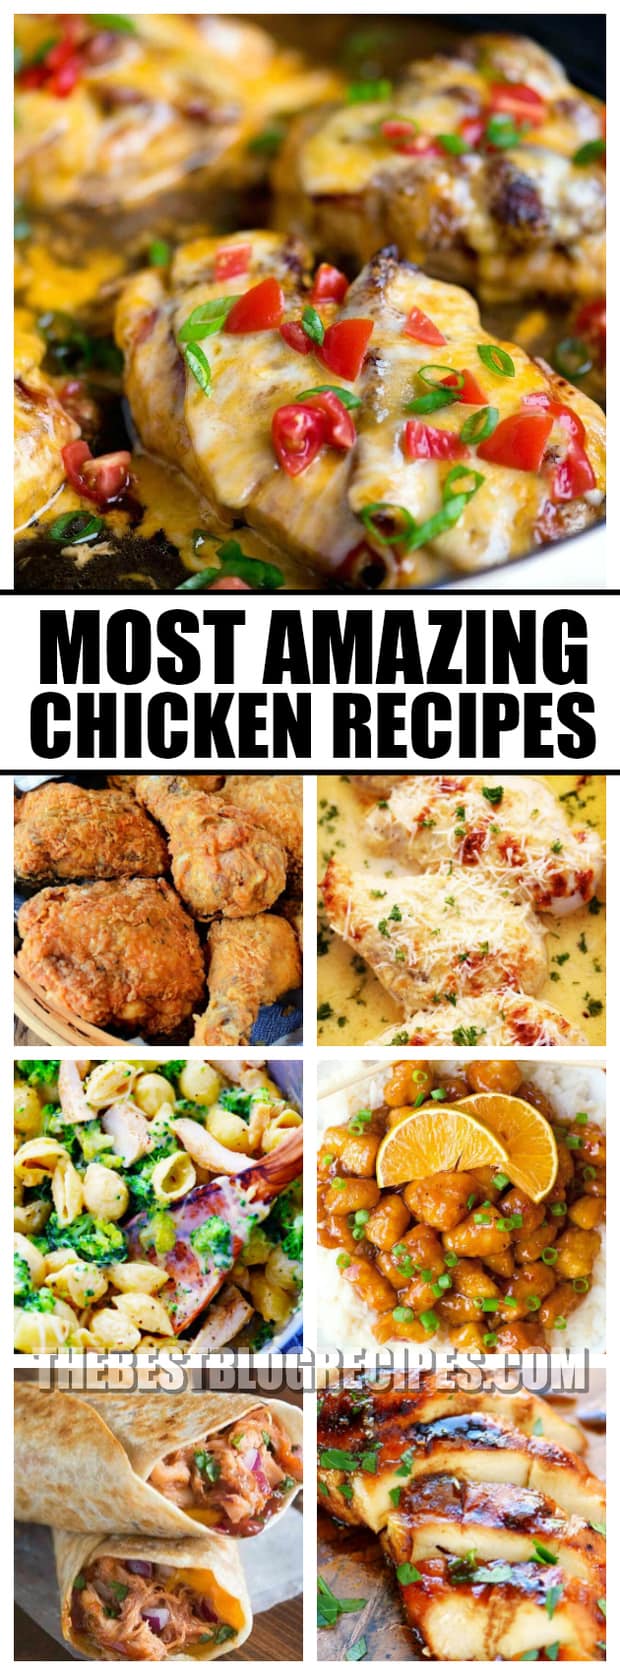 Most Amazing Chicken Recipes - The Best Blog Recipes